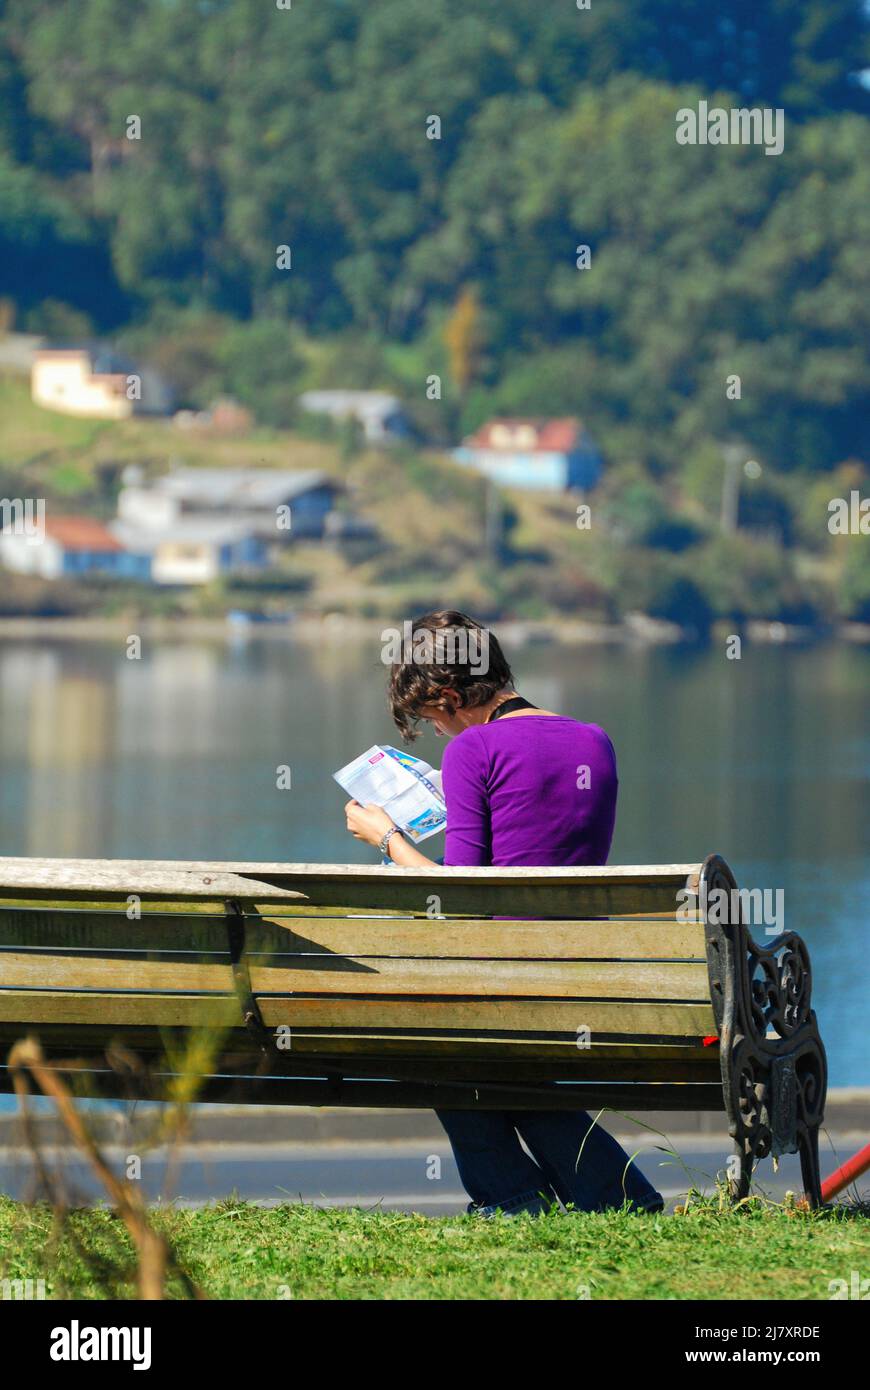 Rearview of a woman sitting on an outdoor bench reading a tourist map of Chile Stock Photo